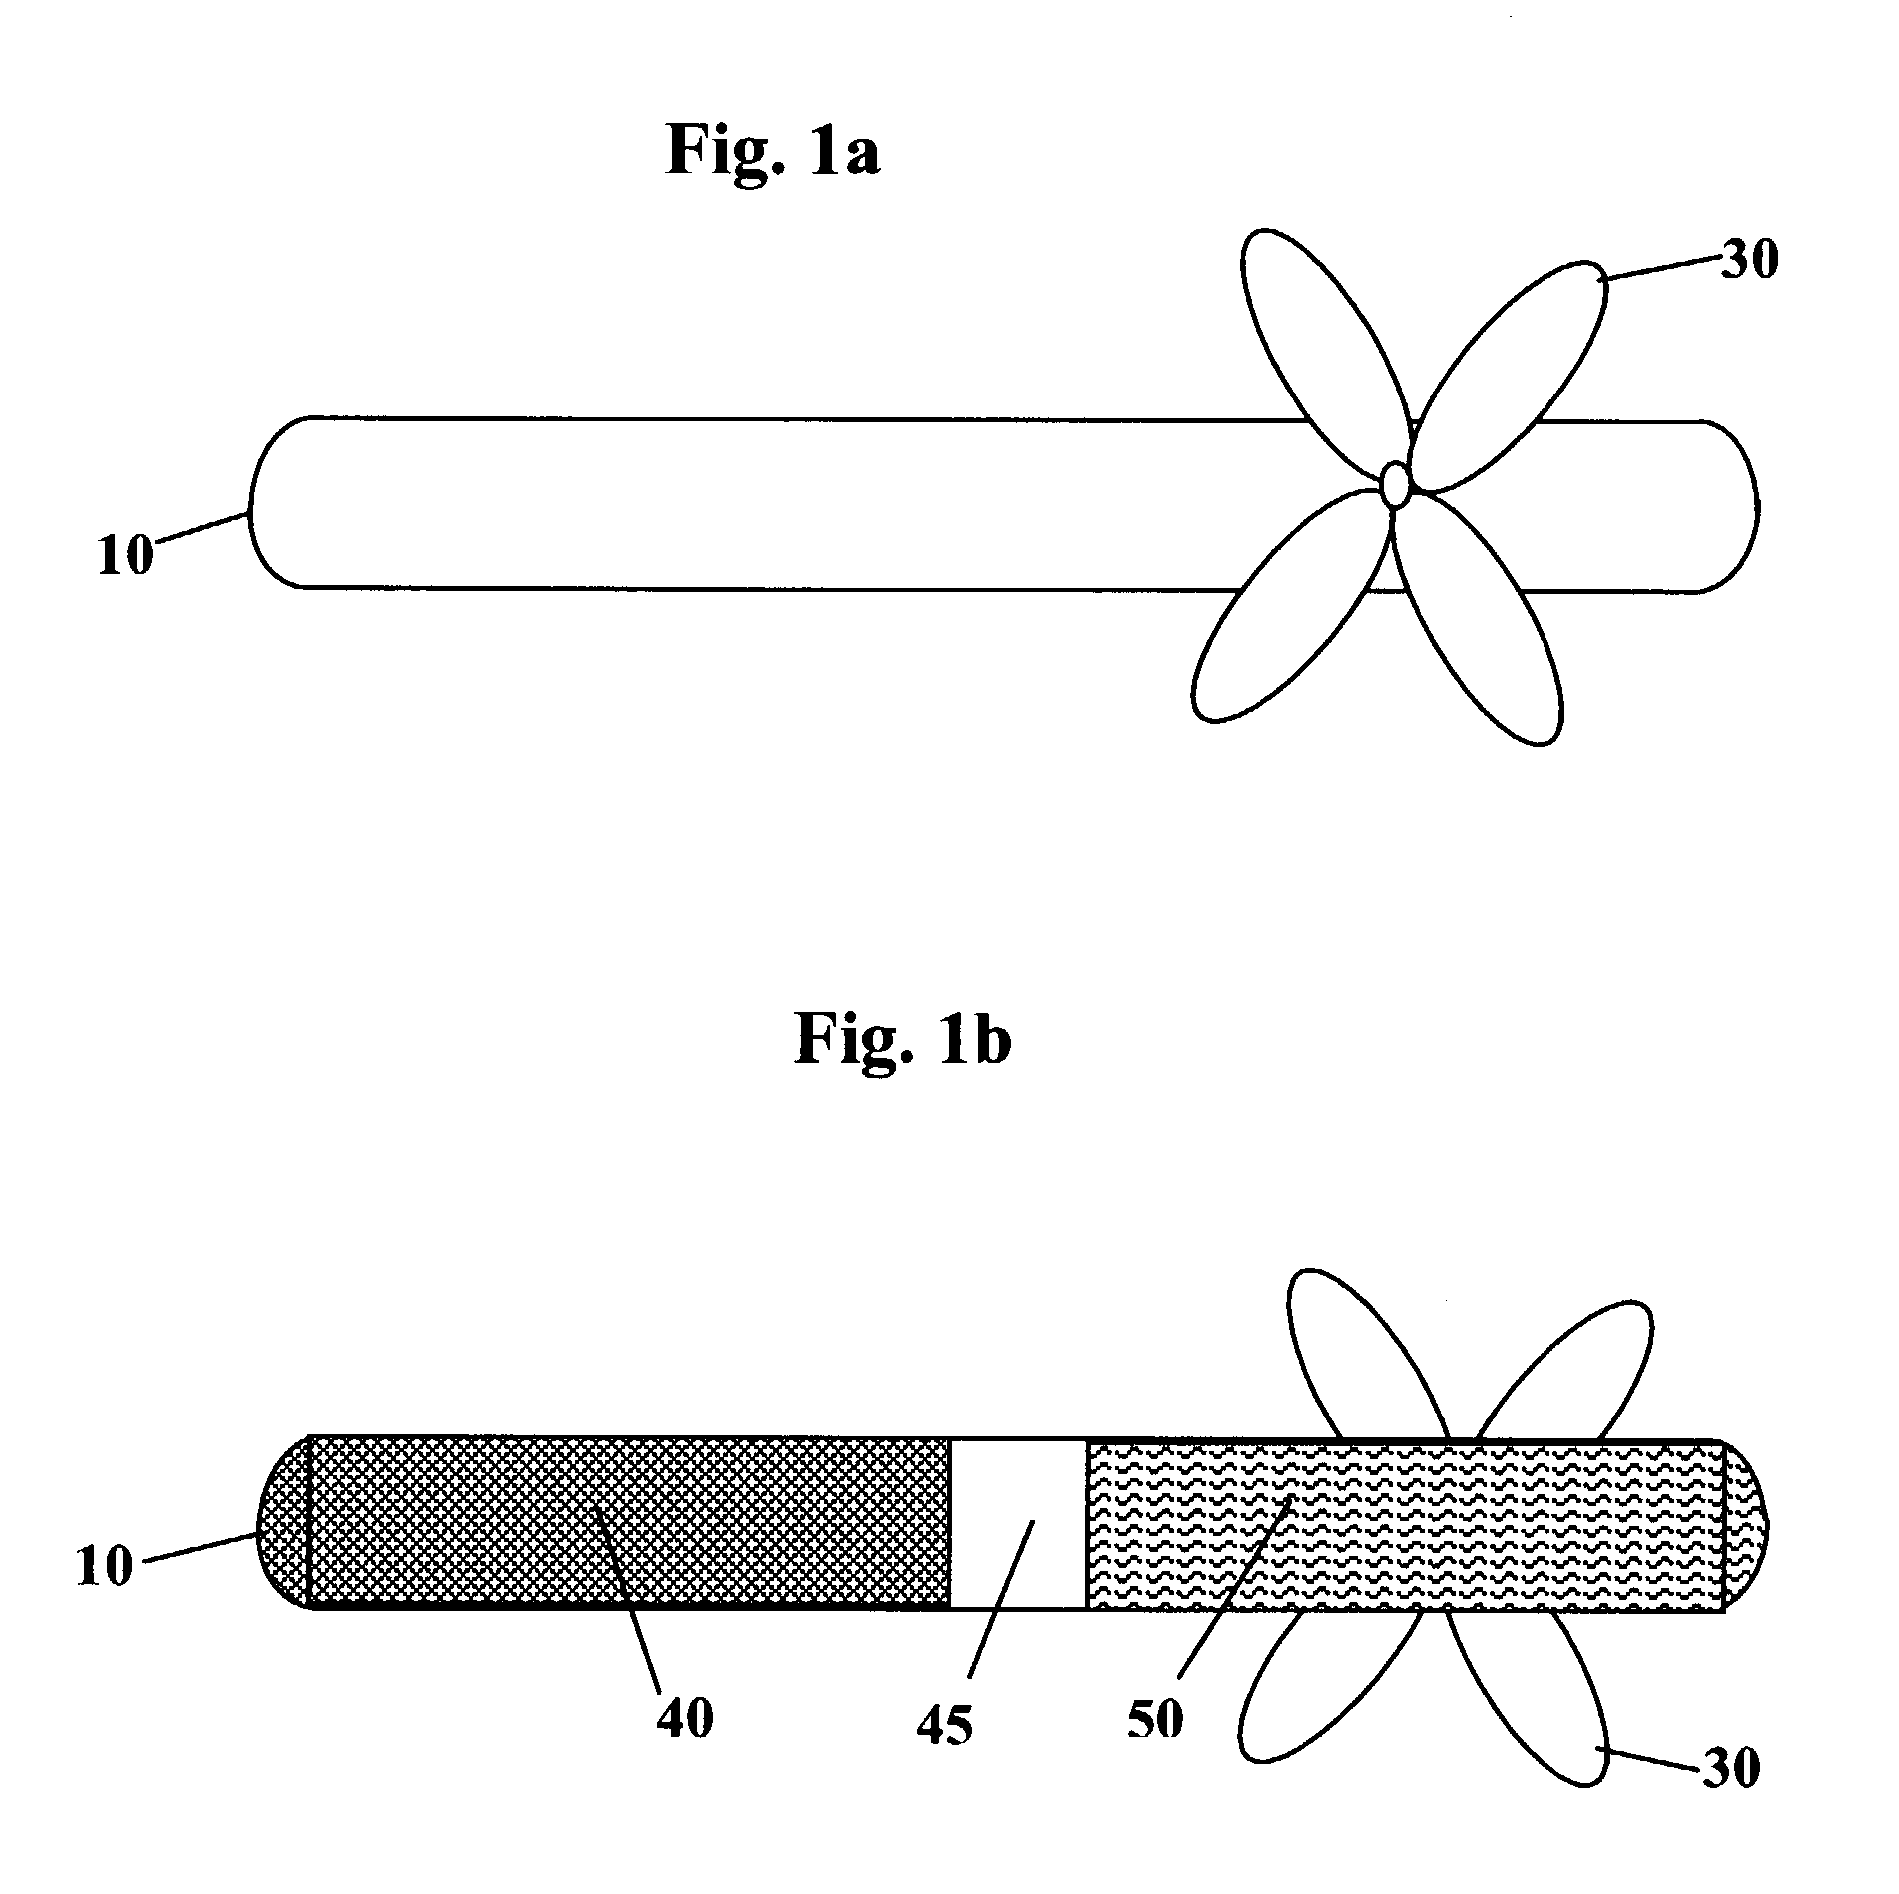 Child's barrette and method of application